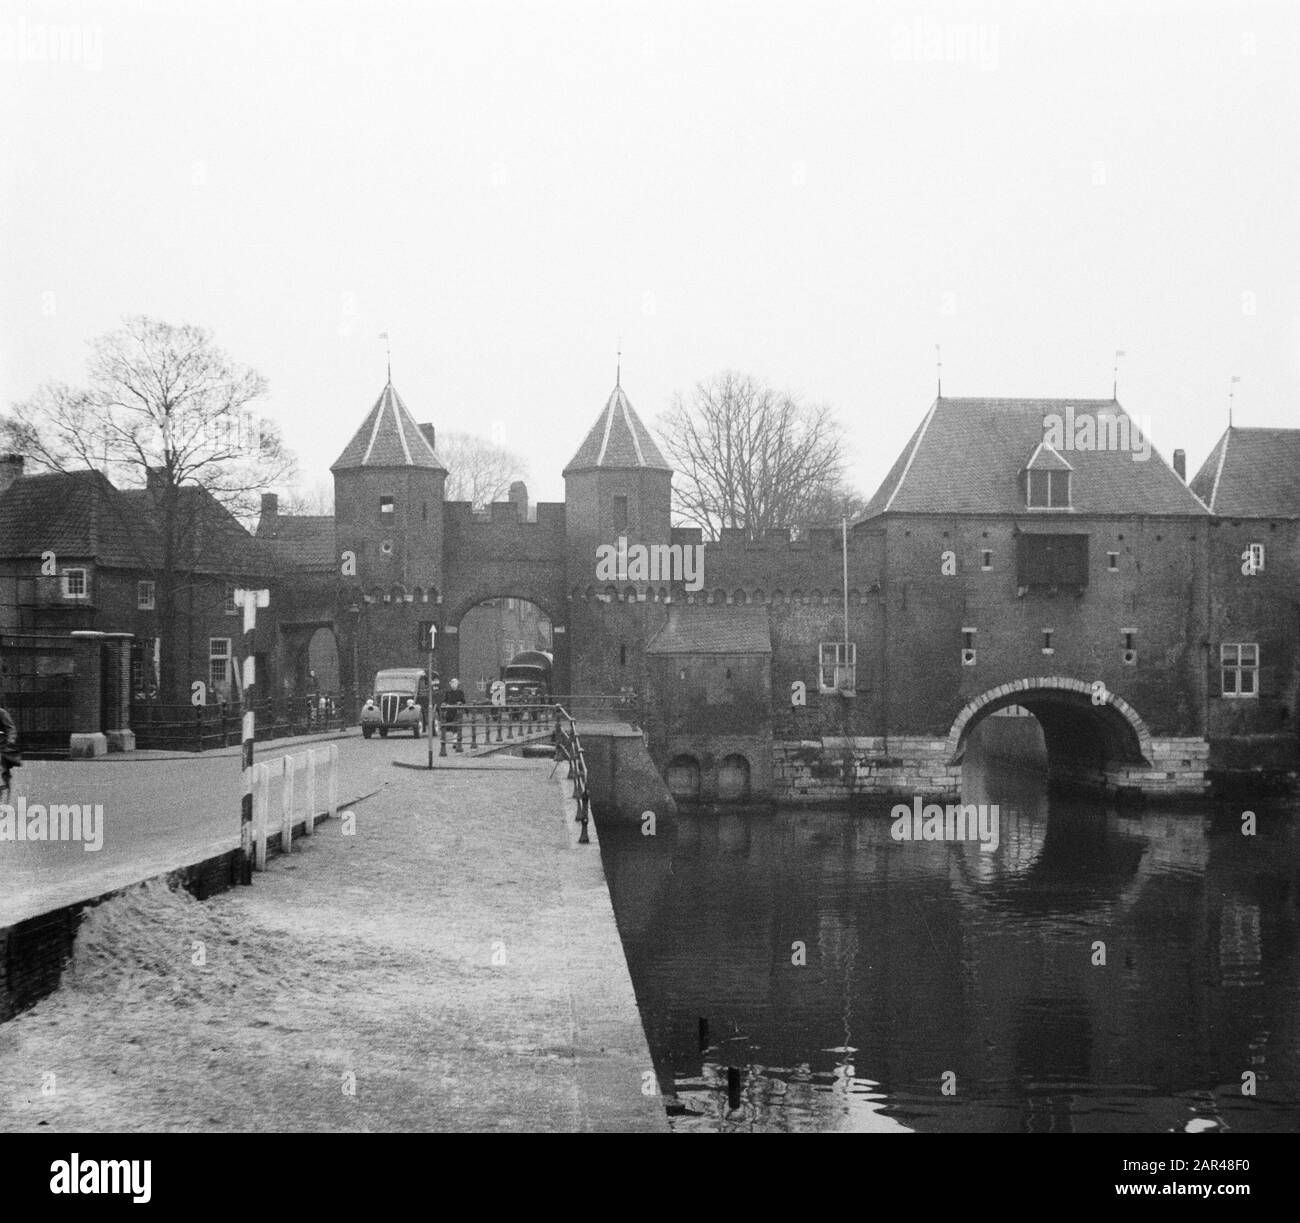 Townscapes Amersfoort Date: 21 January 1953 Location: Amersfoort Keywords: Cityscapes Stock Photo